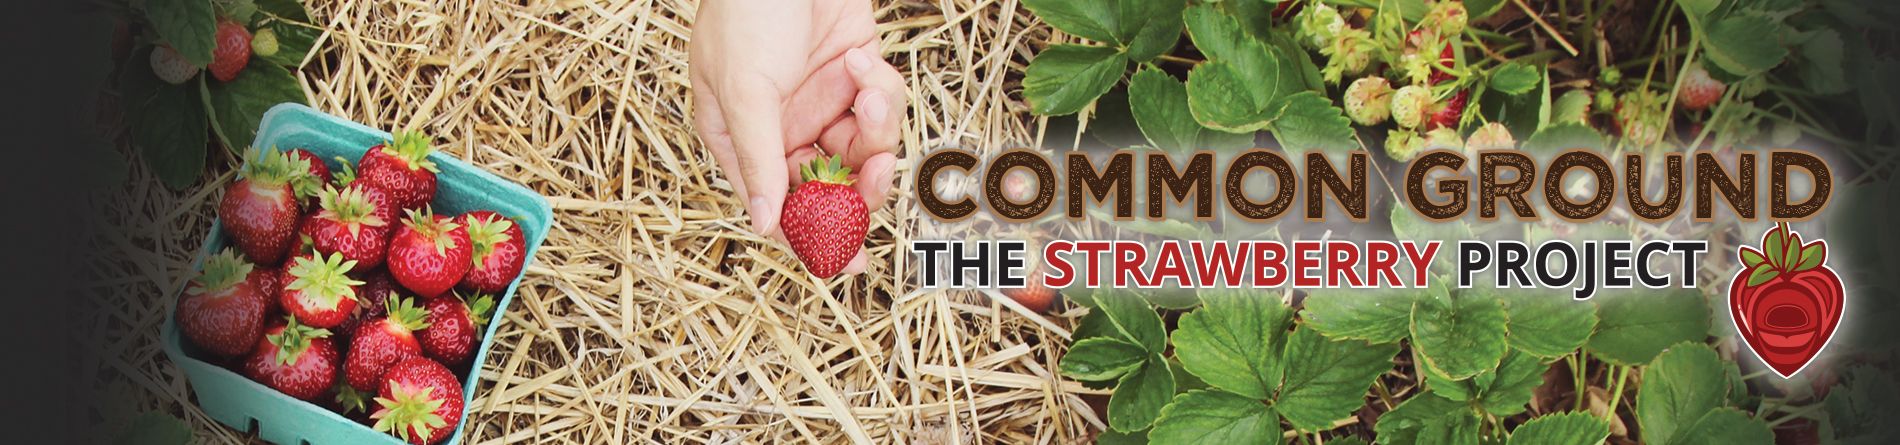 Common Ground: The Strawberry Project